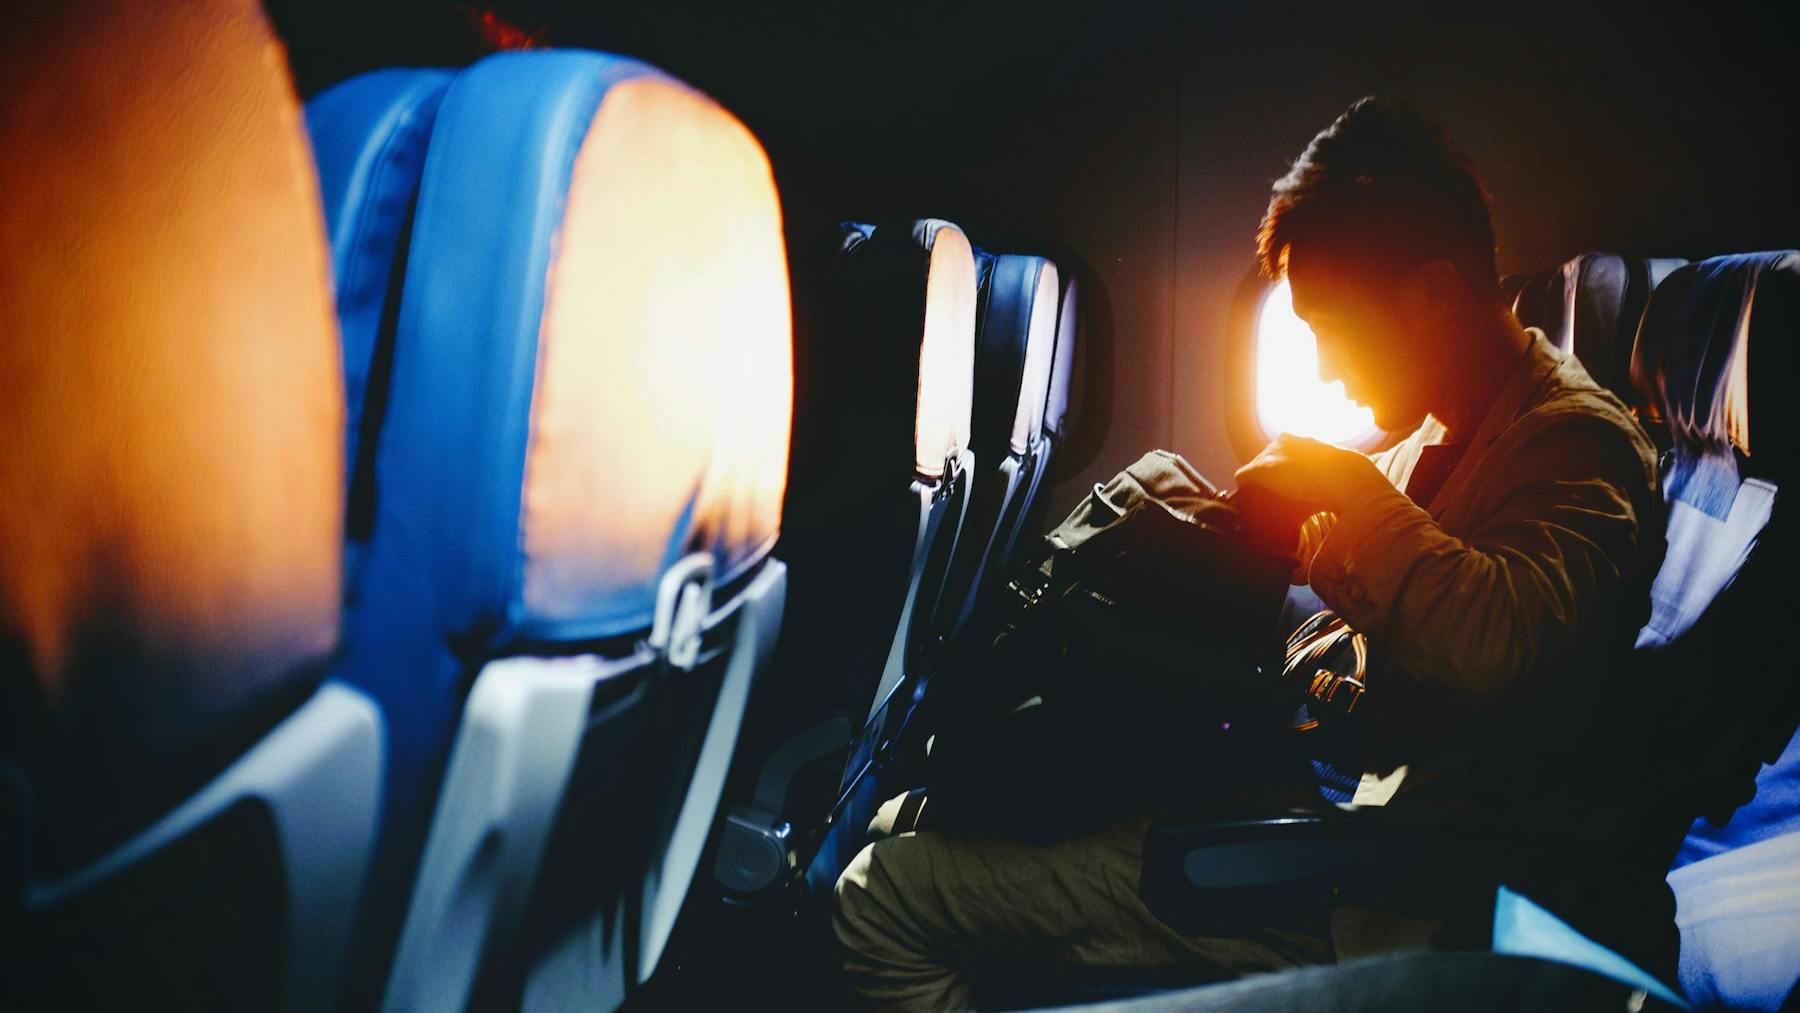 A man looking into his bag while in an airplane